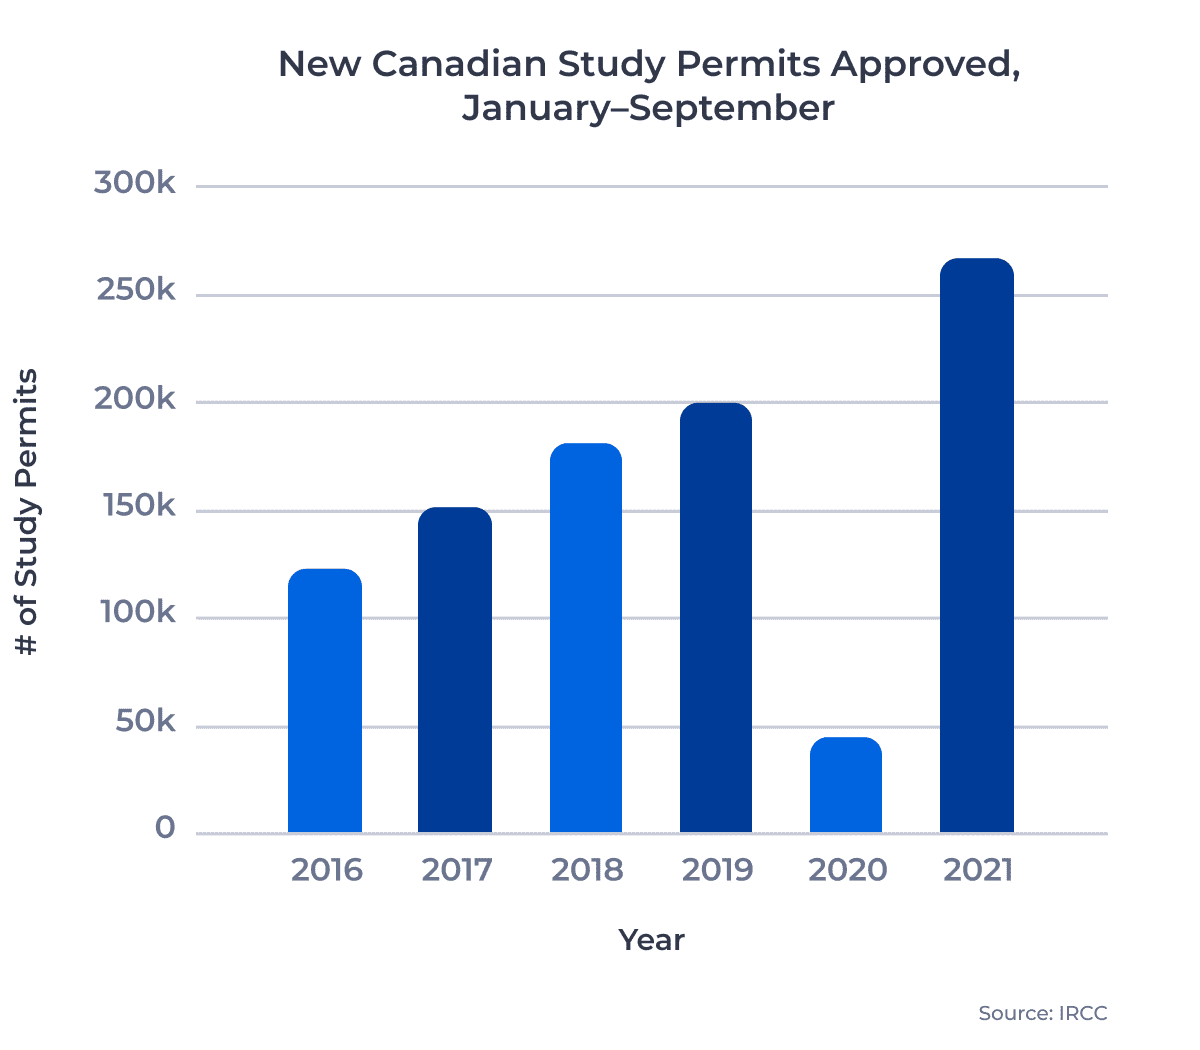 Bar chart showing the number of Canadian study permits approved between January and September from 2016 to 2021.